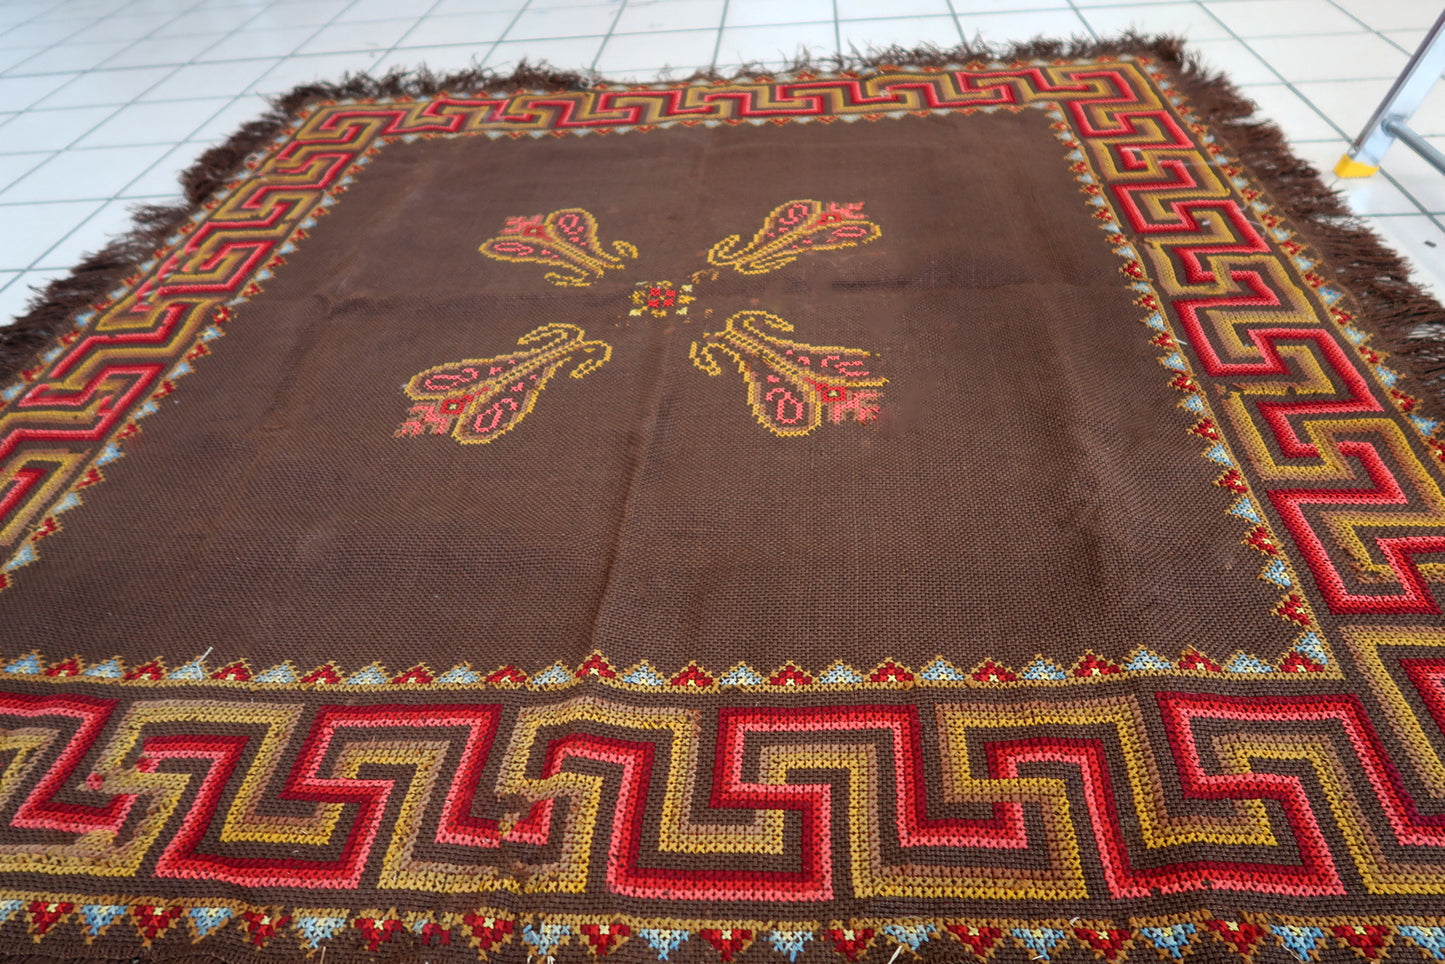 Handmade vintage unusual square Tapestry from Portugal. The tapestry is in original good condition, has minimal signs of age. It is from the middle of 20th century.